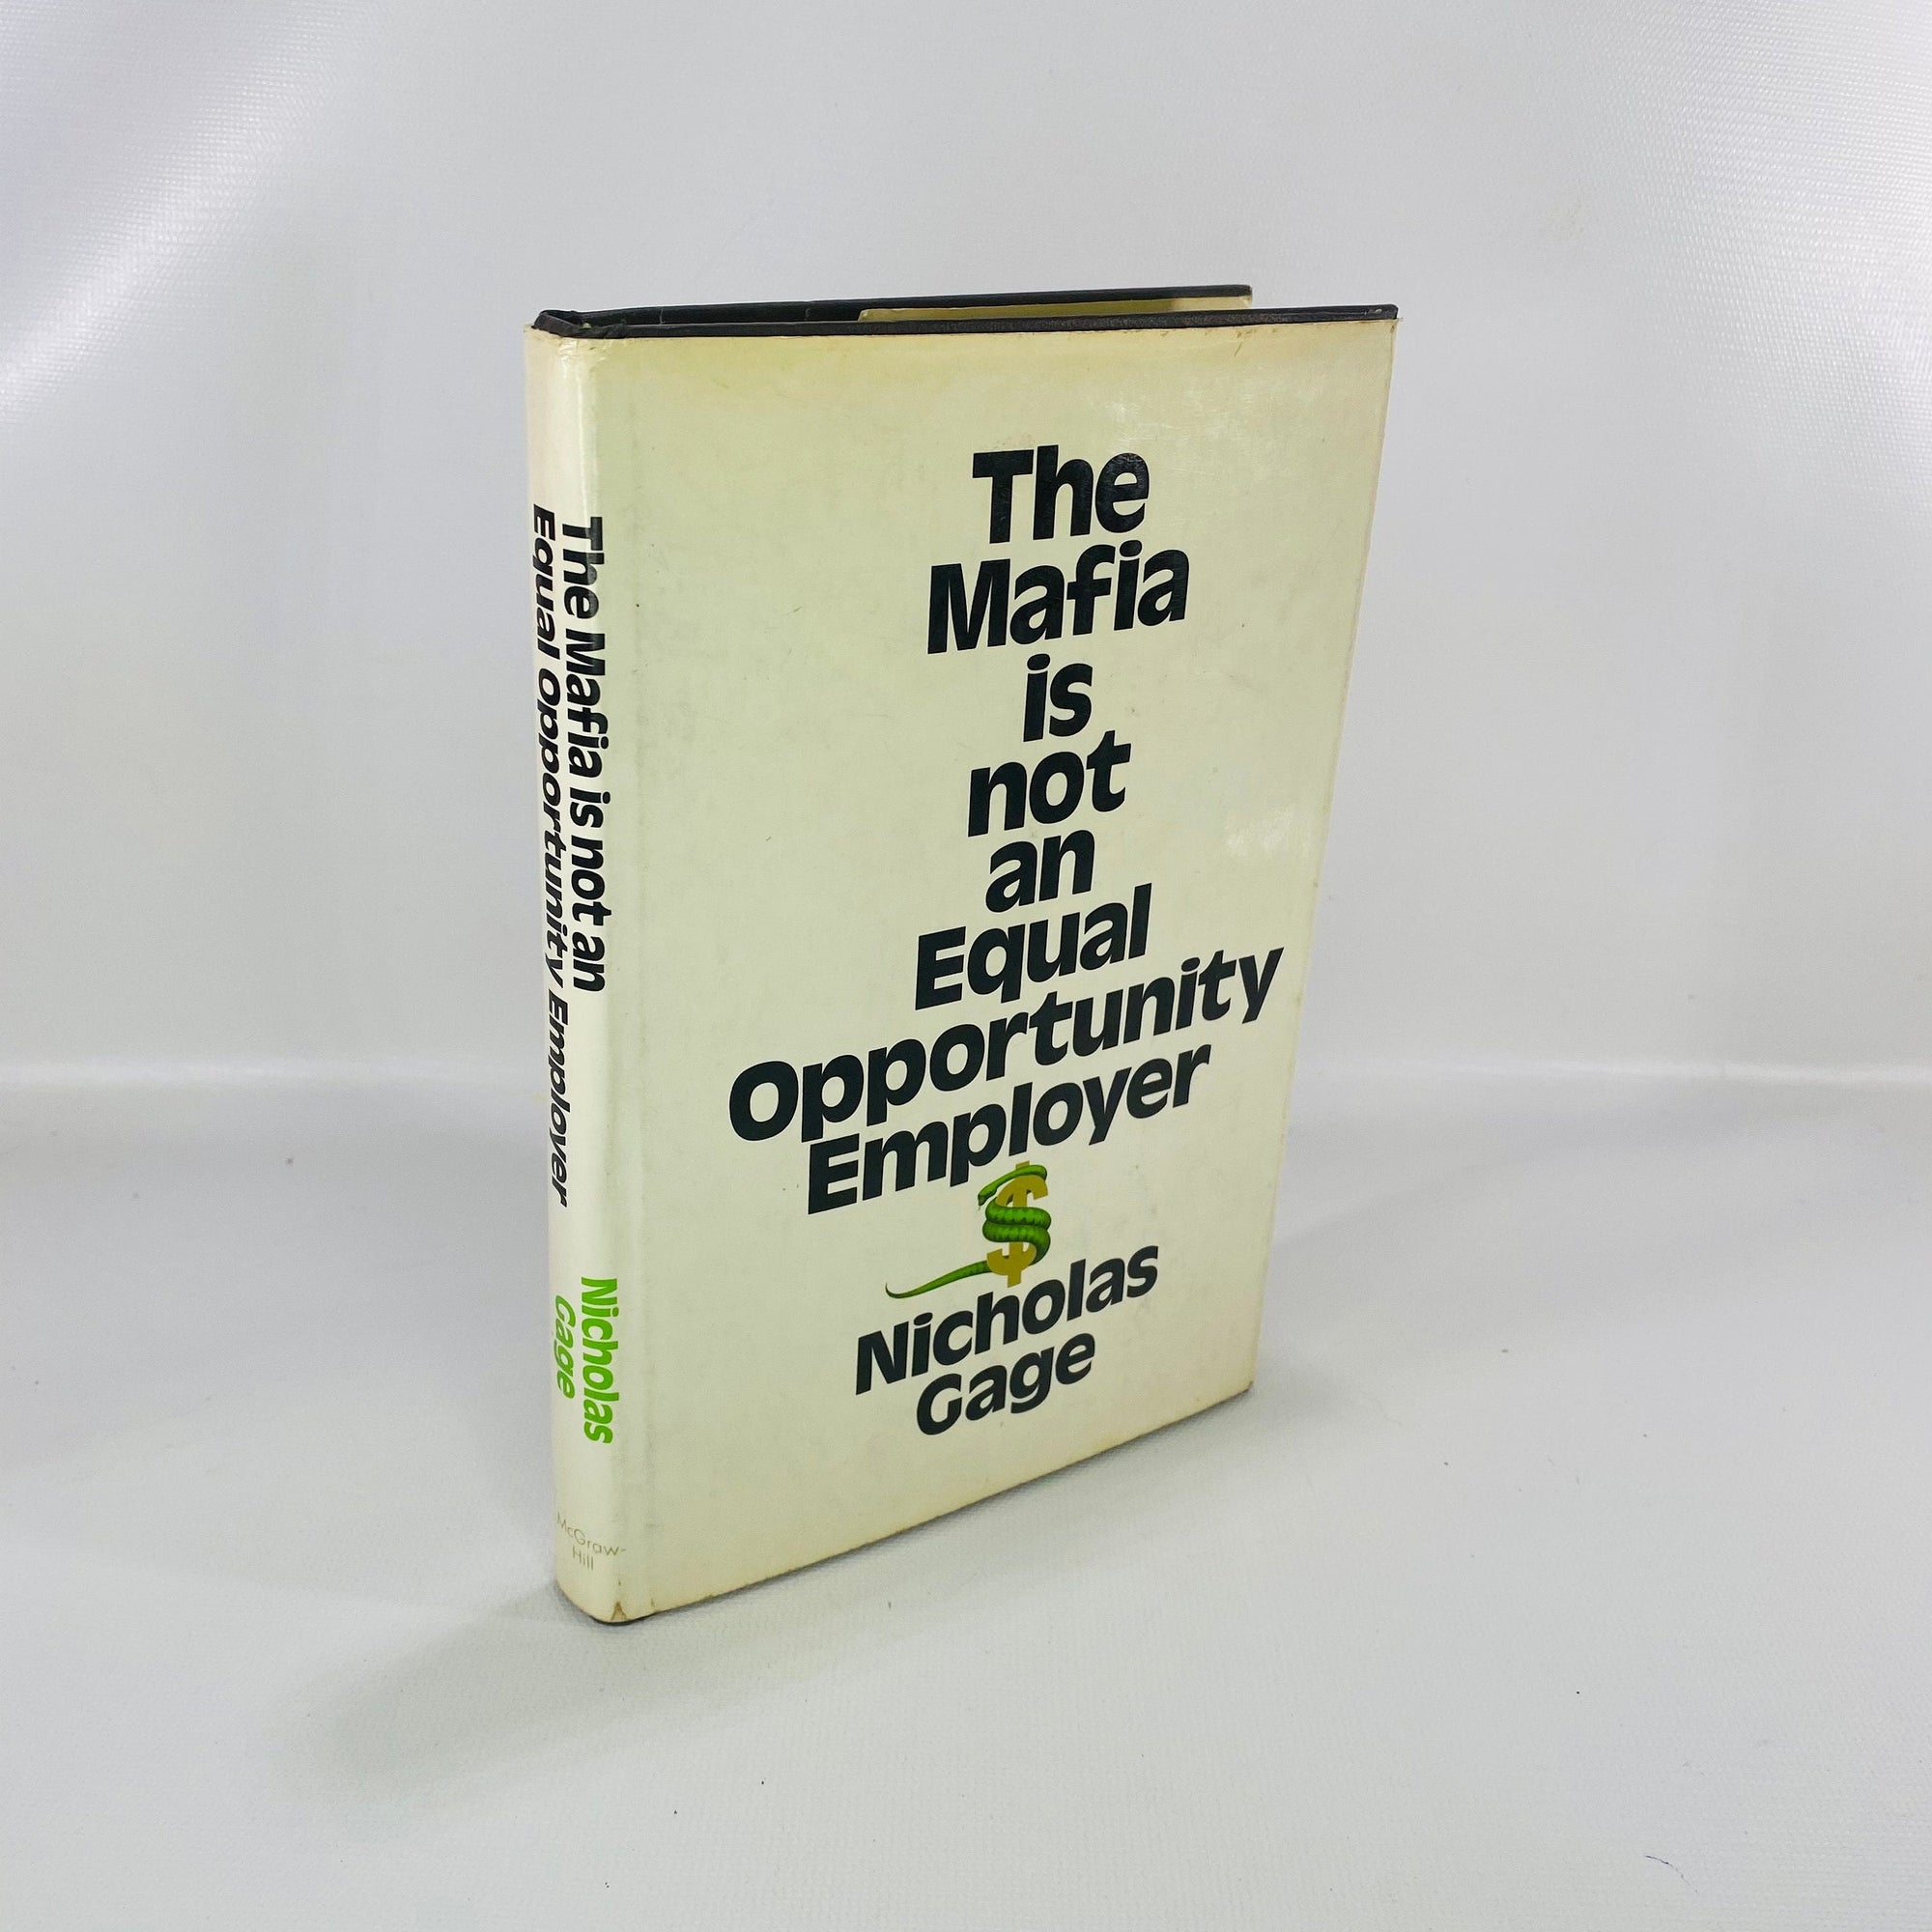 This Mafia is not an Equal Opportunity Employer by Nicholas Gage 1971 First Edition McGraw-Hill Co Vintage Book